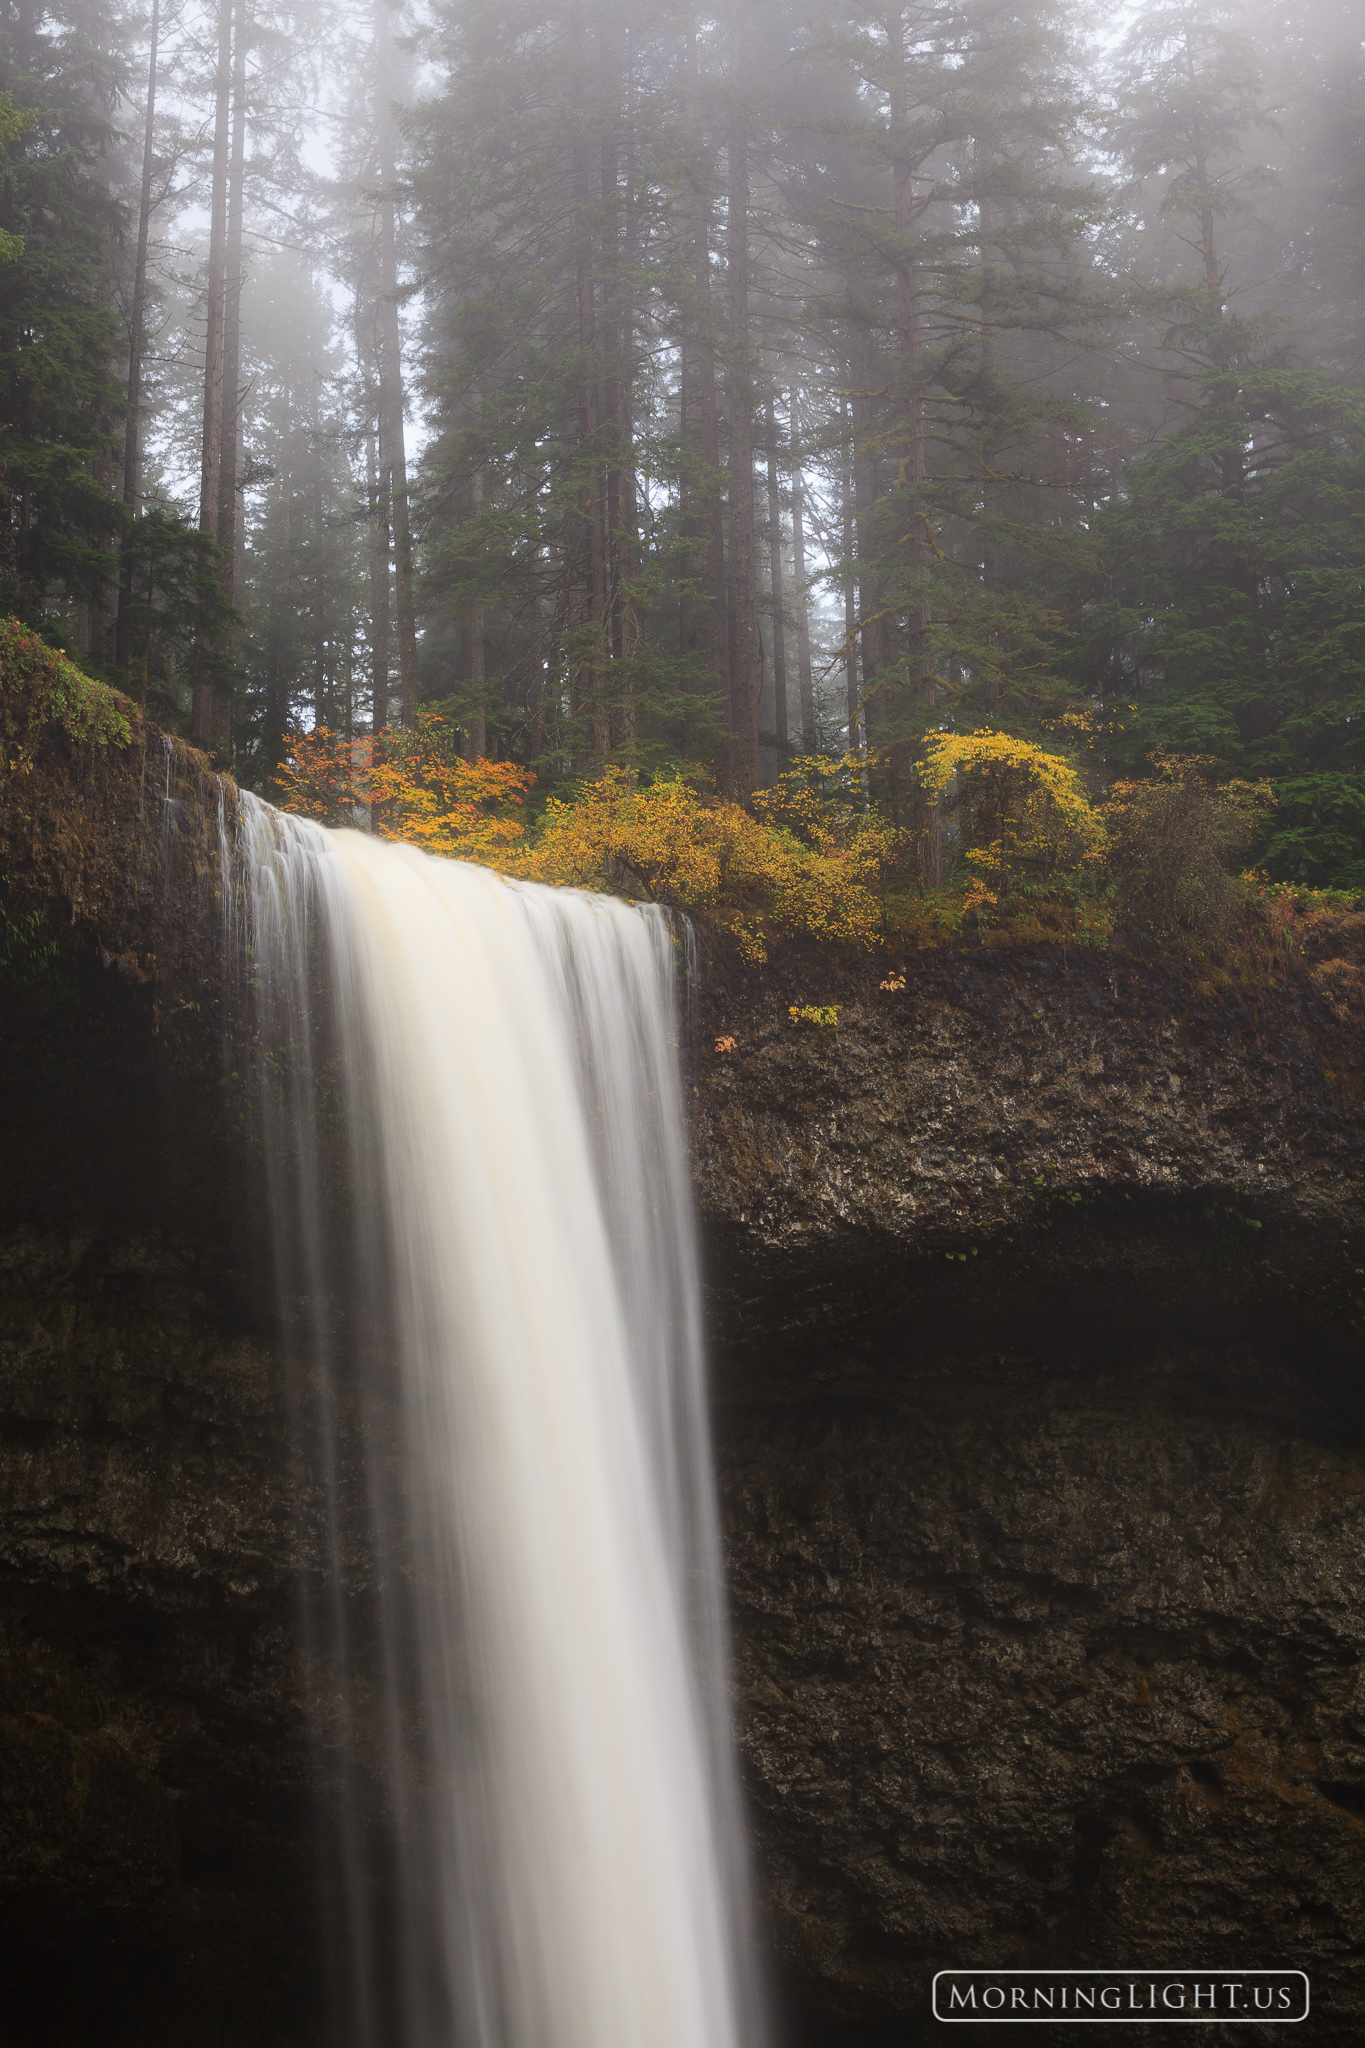 On a foggy day this waterfall took on a very mysterious feel. This is one of my favorite photos from my 2012 visit to the Pacific...